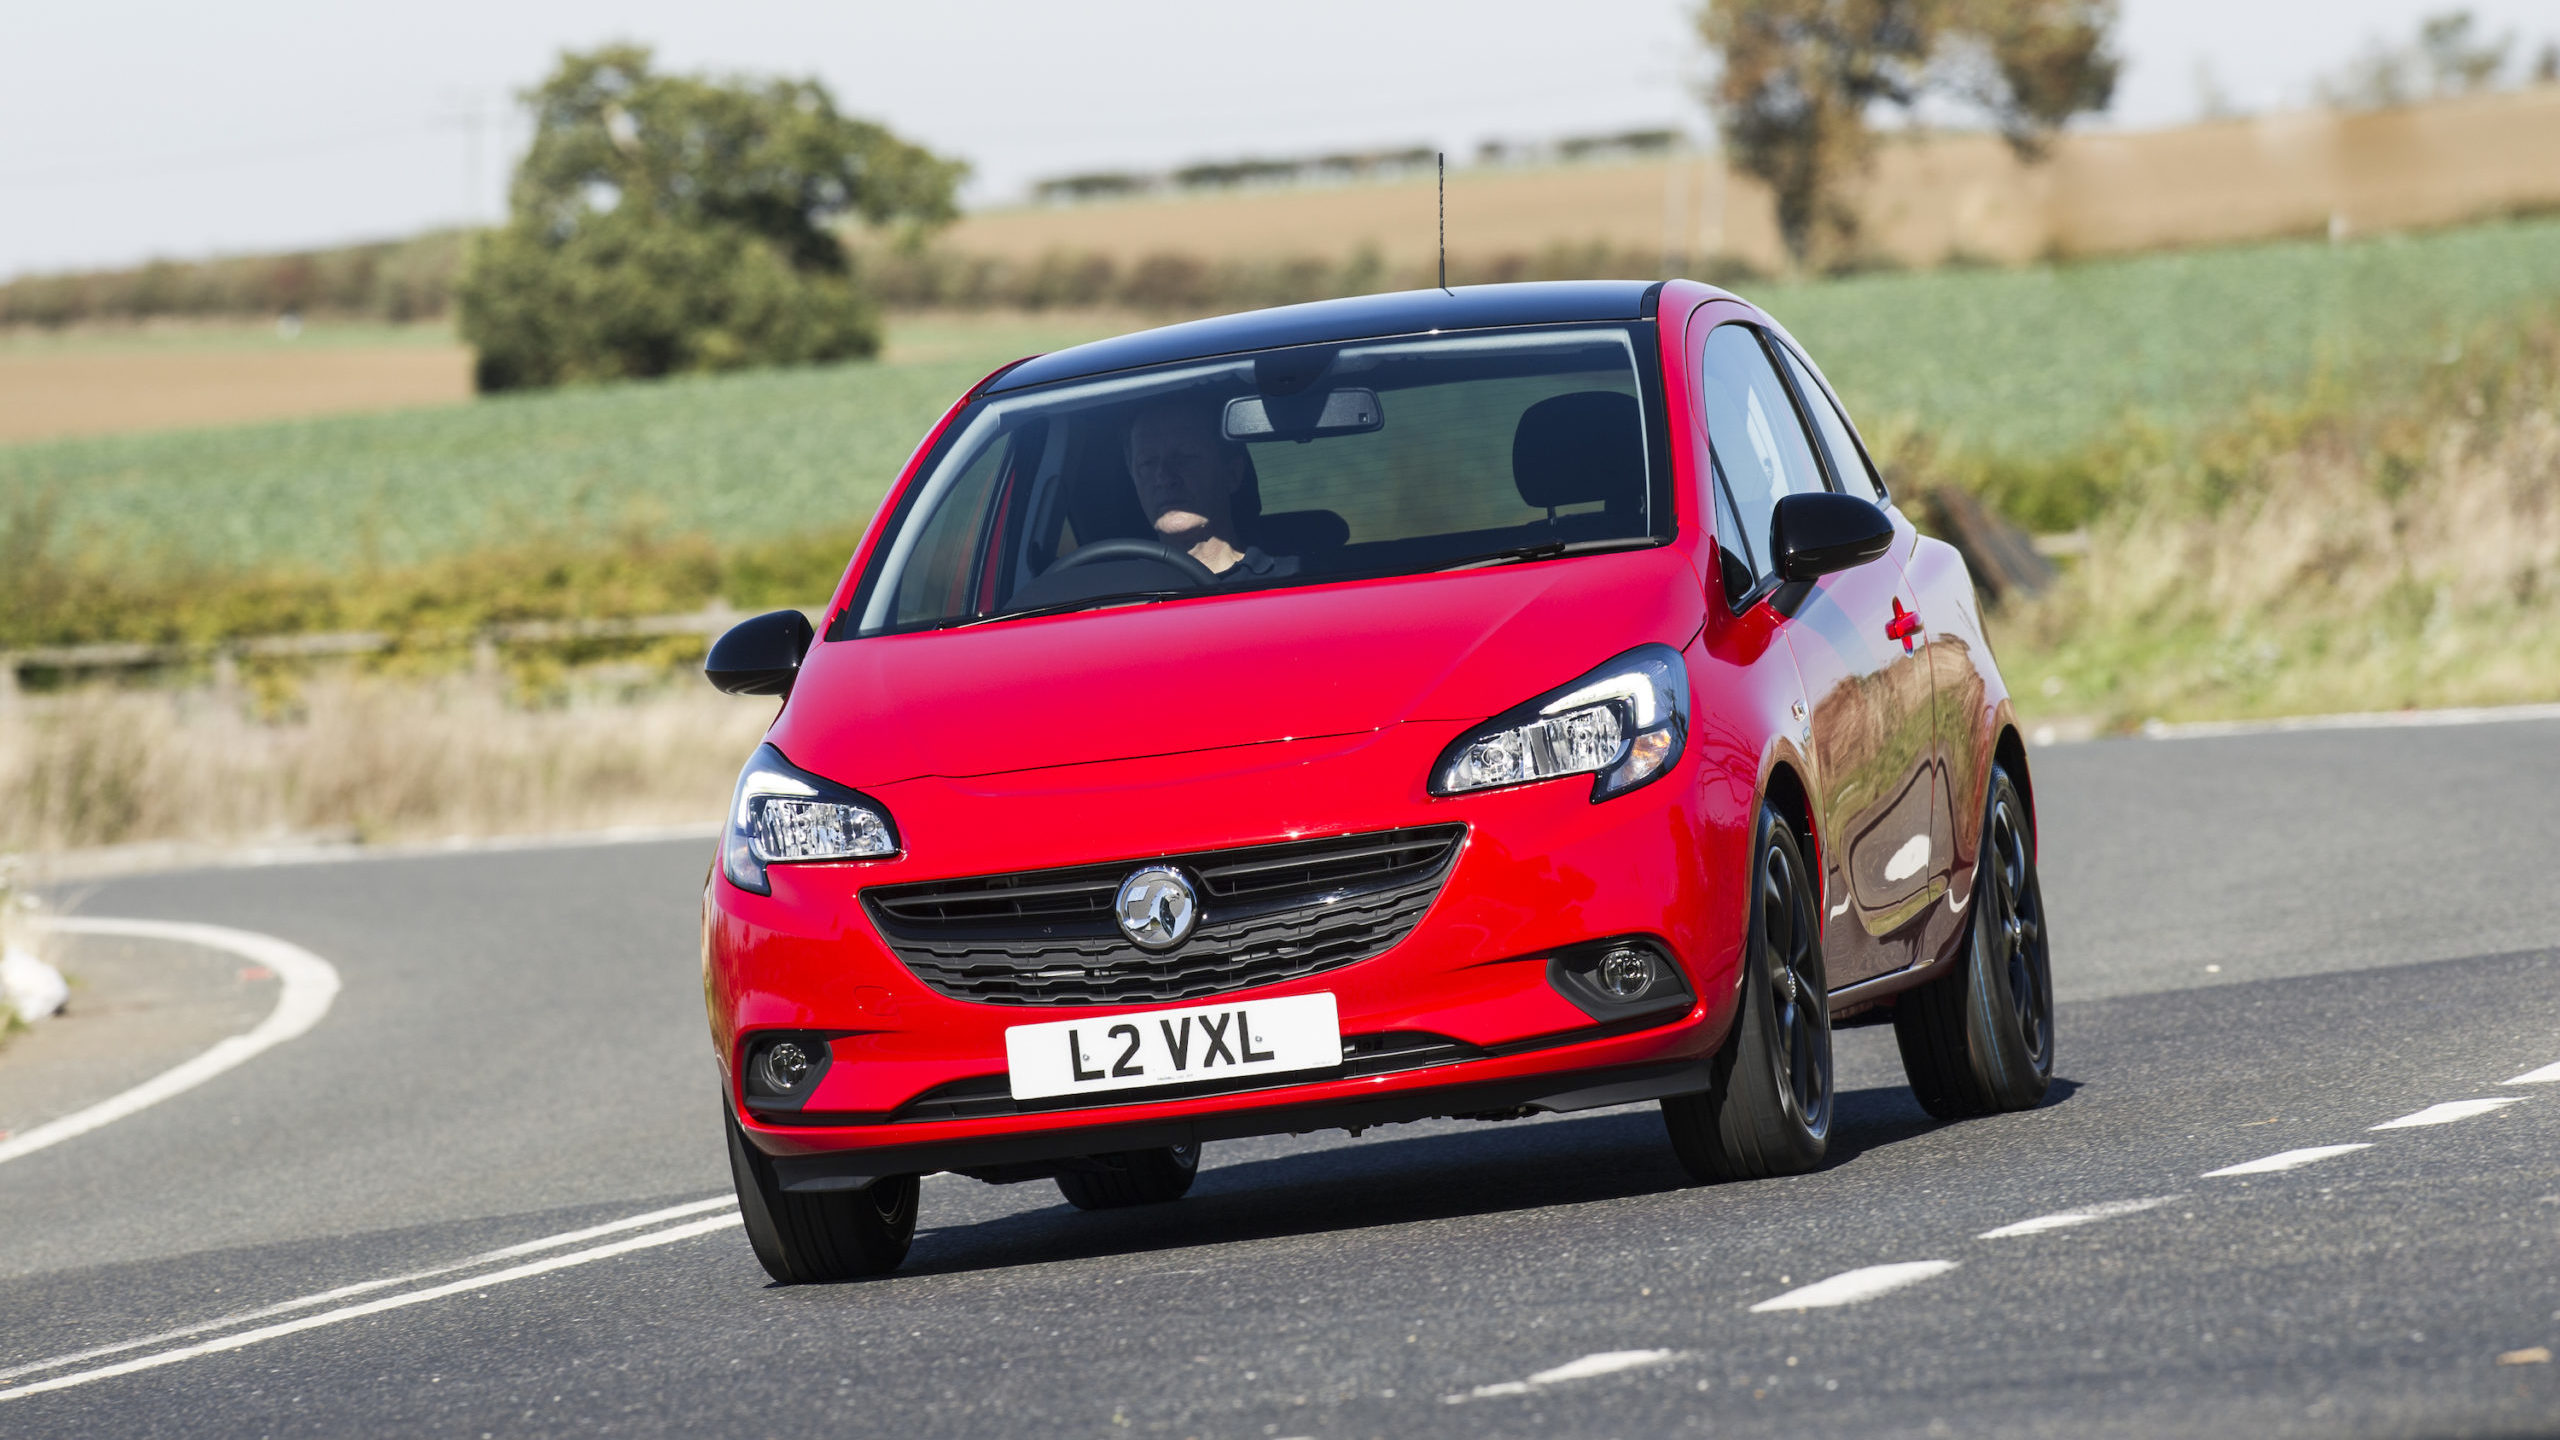 Corsa C, best looking small hatch of its generation (Full Review